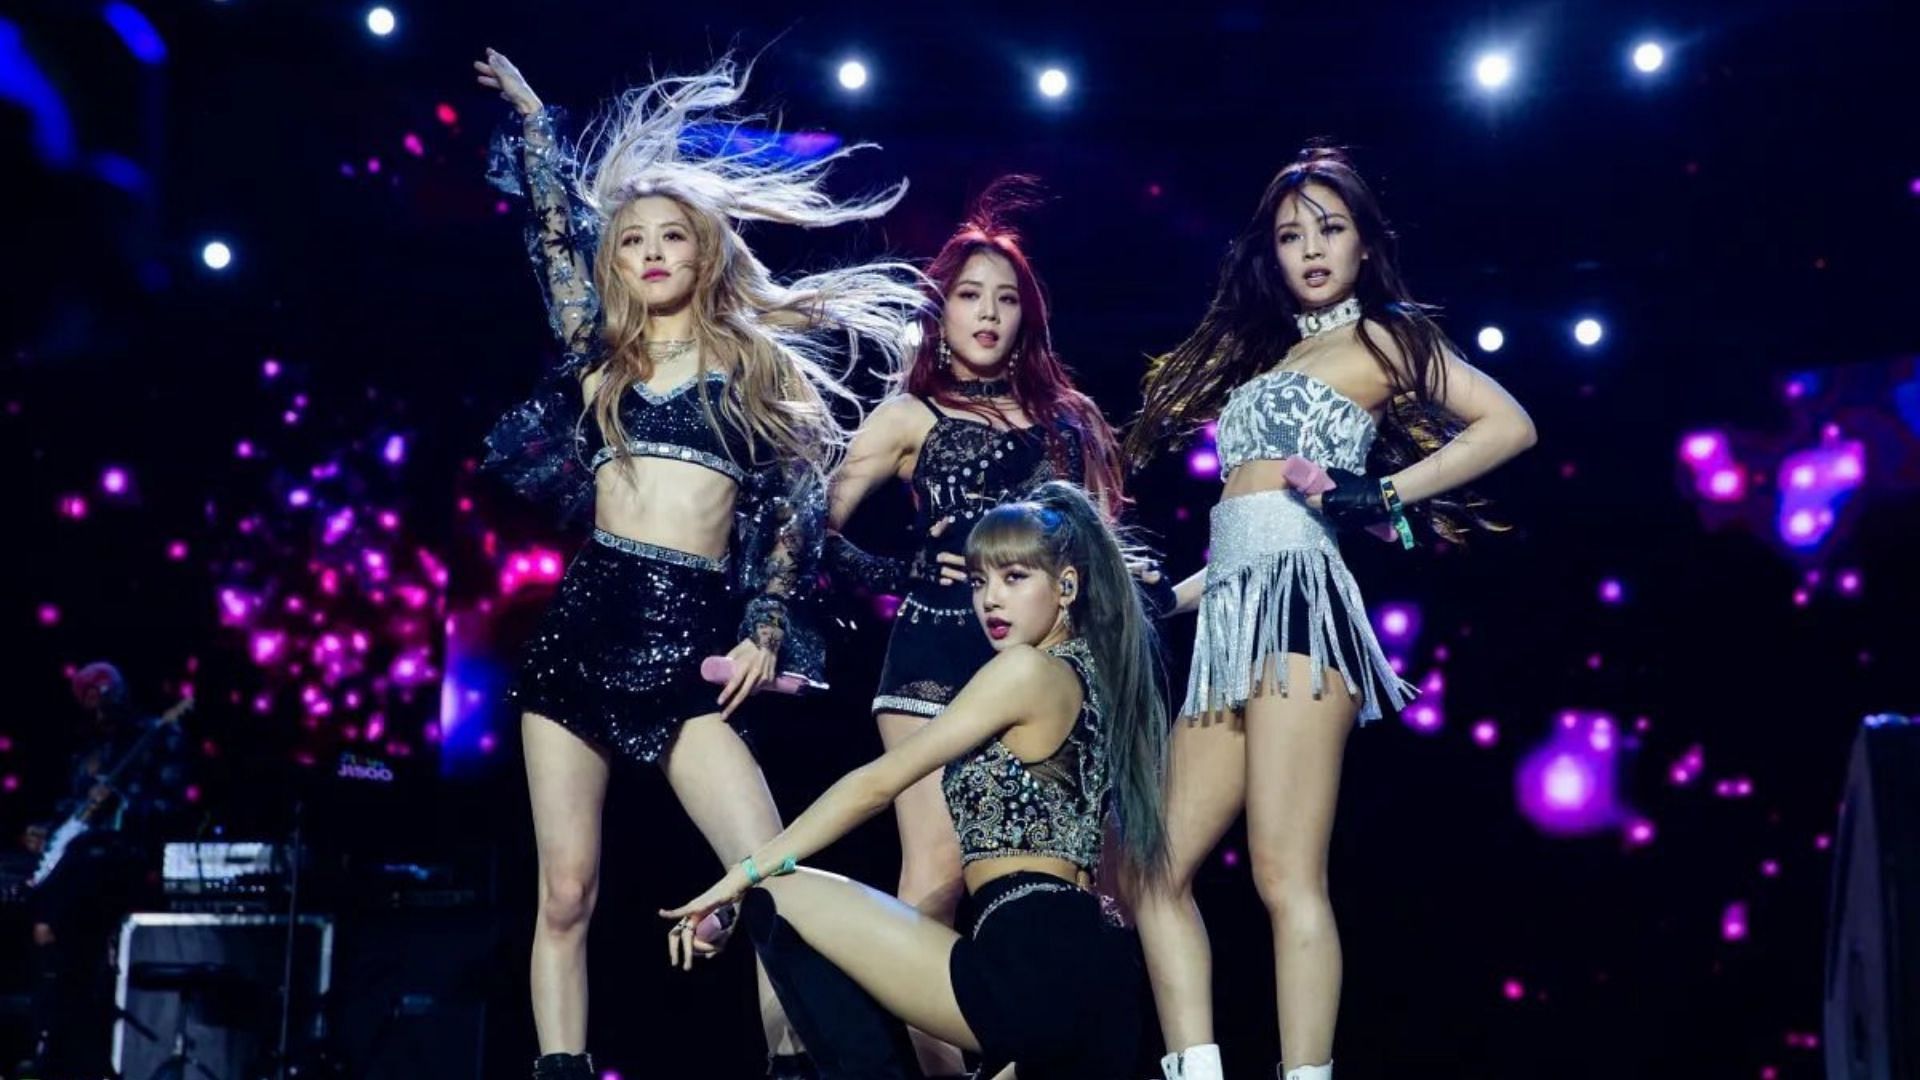 BLACPINK (Image via Getty)